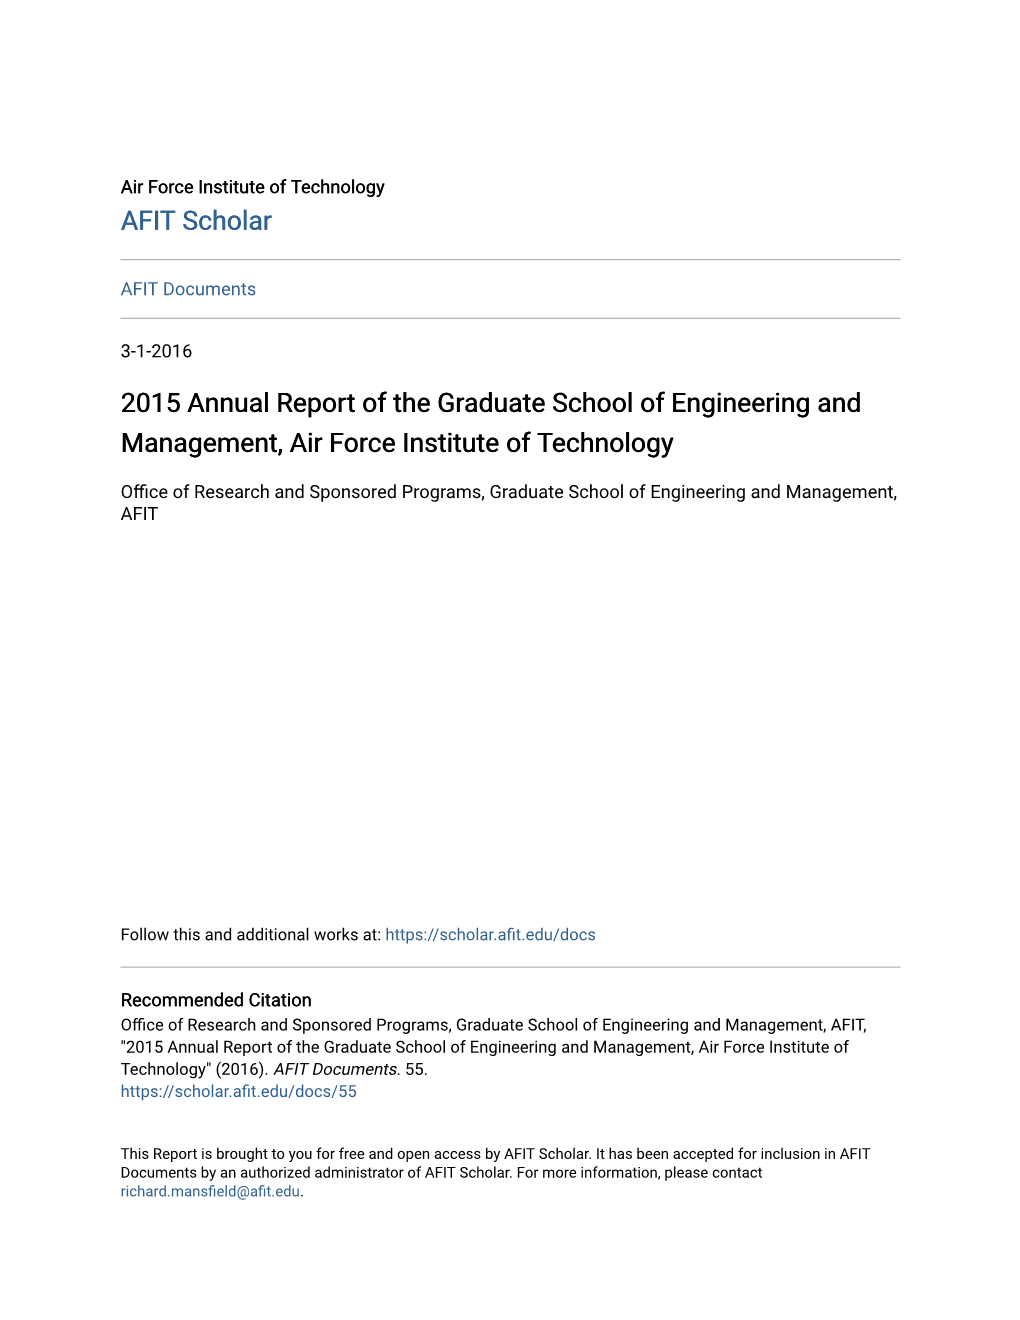 2015 Annual Report of the Graduate School of Engineering and Management, Air Force Institute of Technology